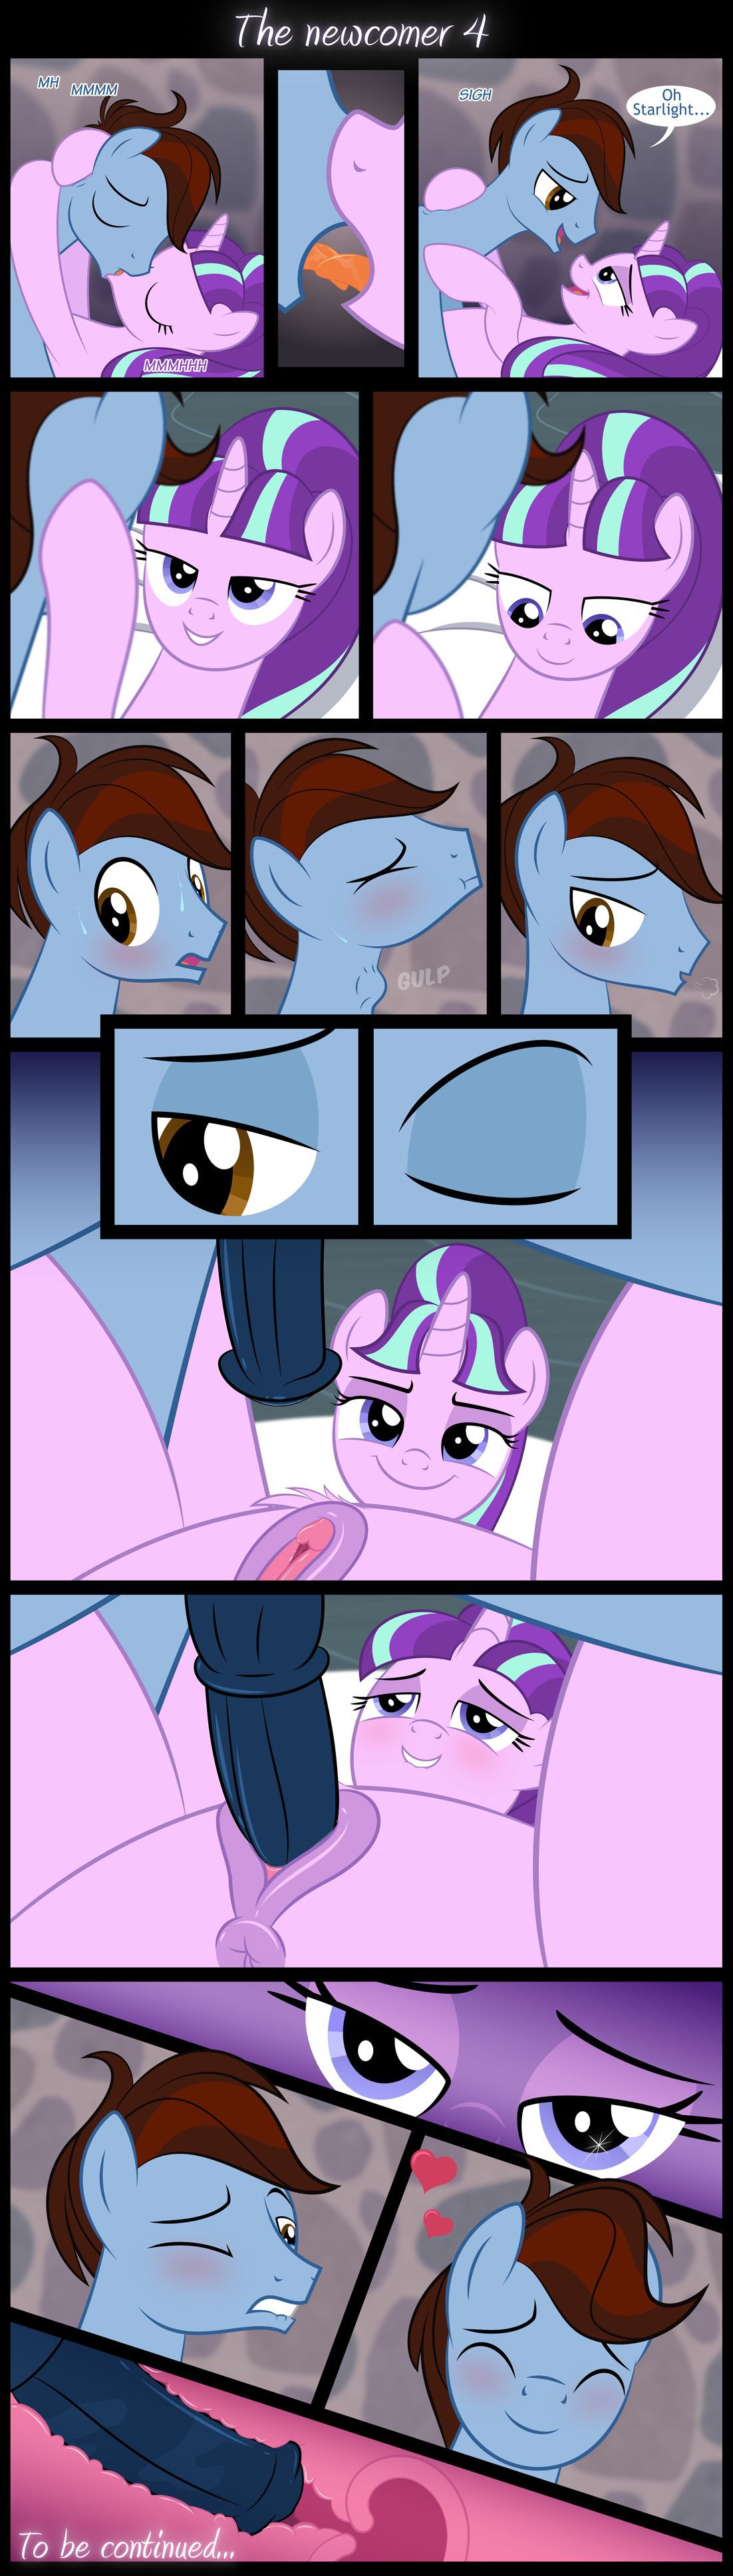 [Culu-Bluebeaver] The Newcomer (My Little Pony: Friendship is Magic) 5